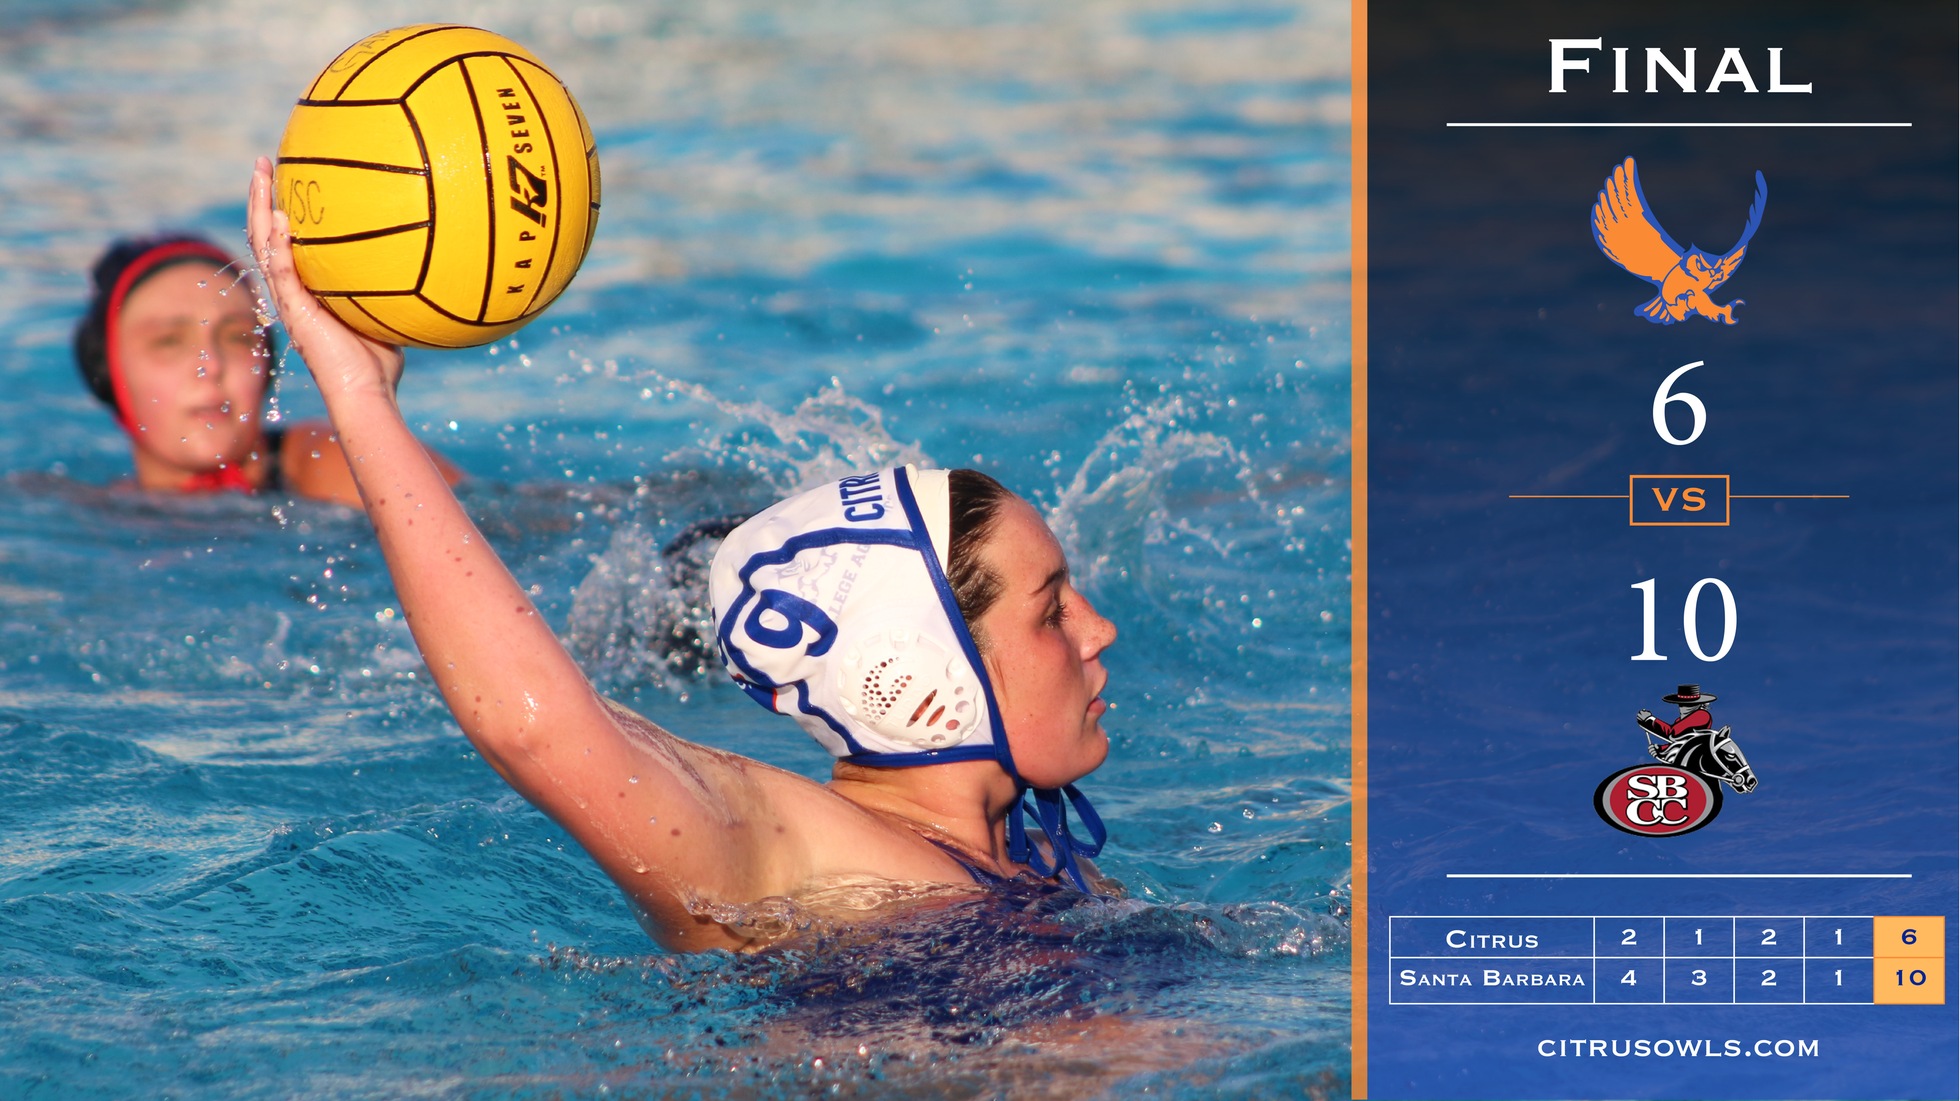 Women's Polo Comes Up Short In Conference Final Loss To Santa Barbara